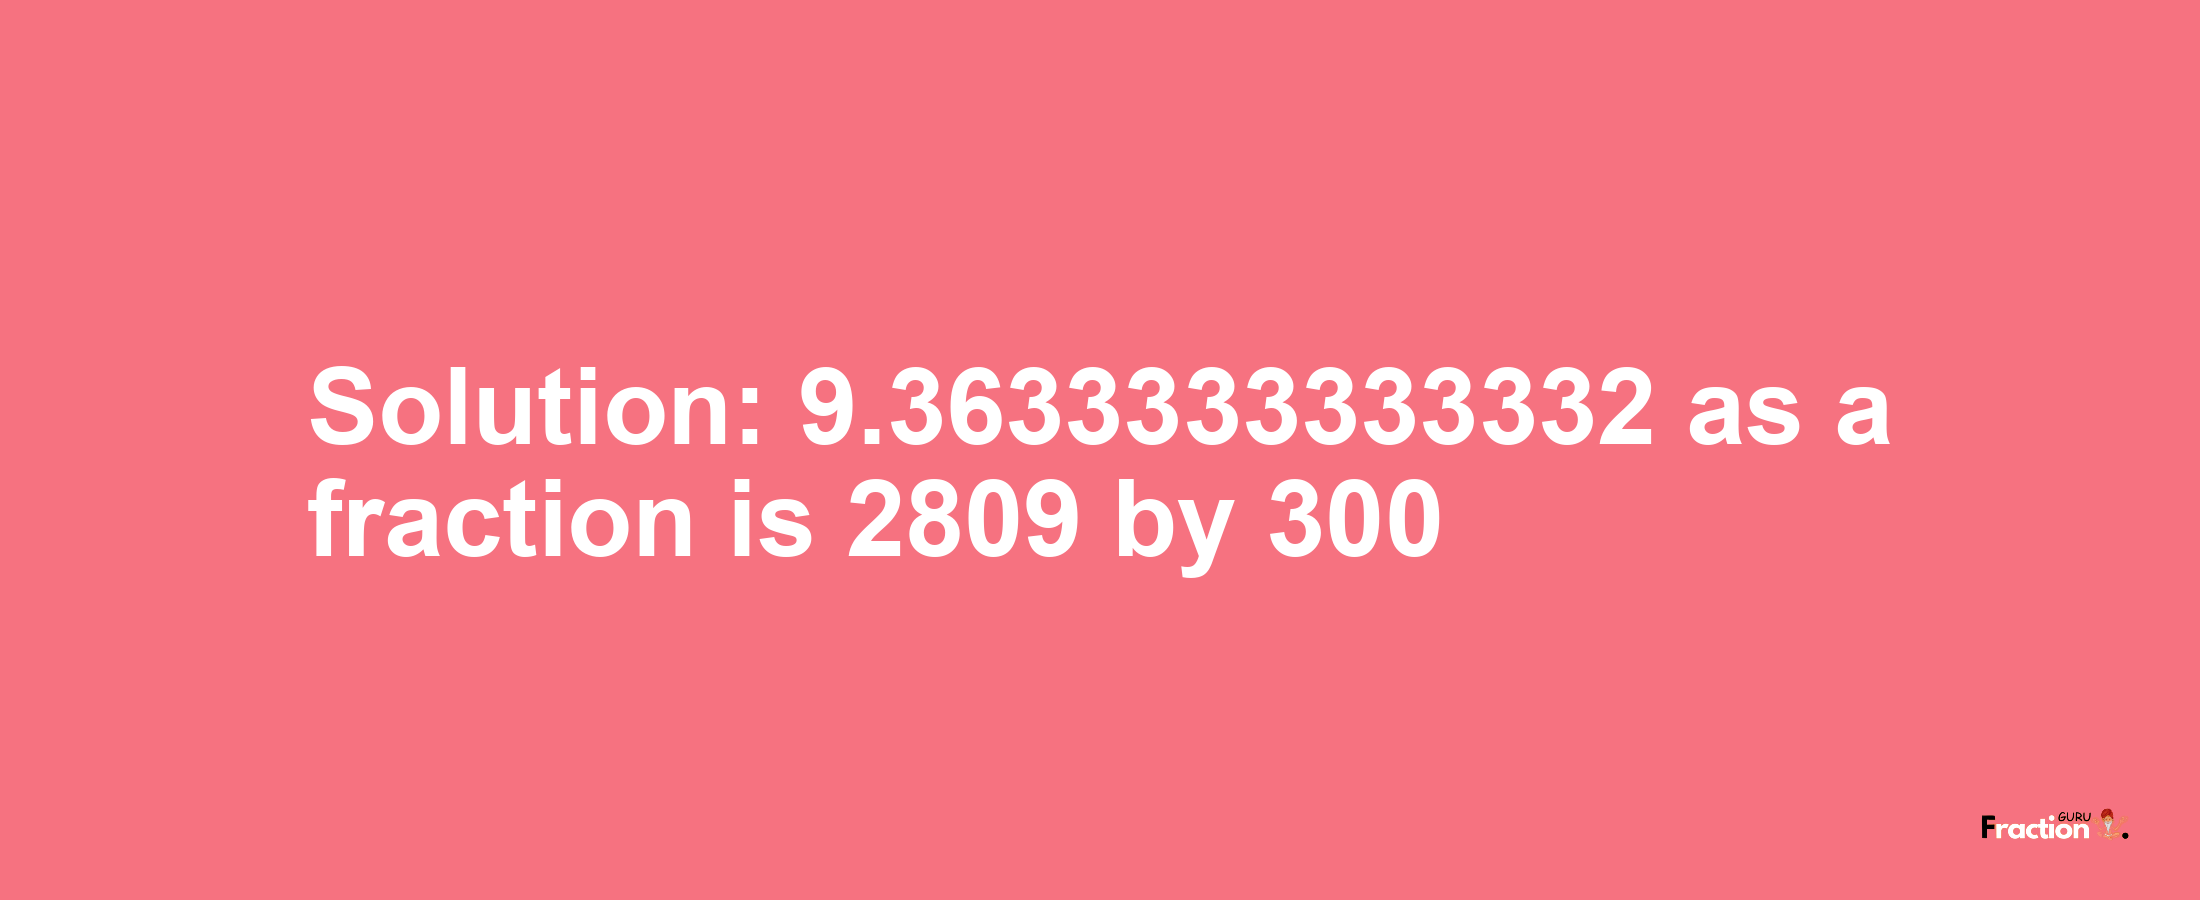 Solution:9.3633333333332 as a fraction is 2809/300